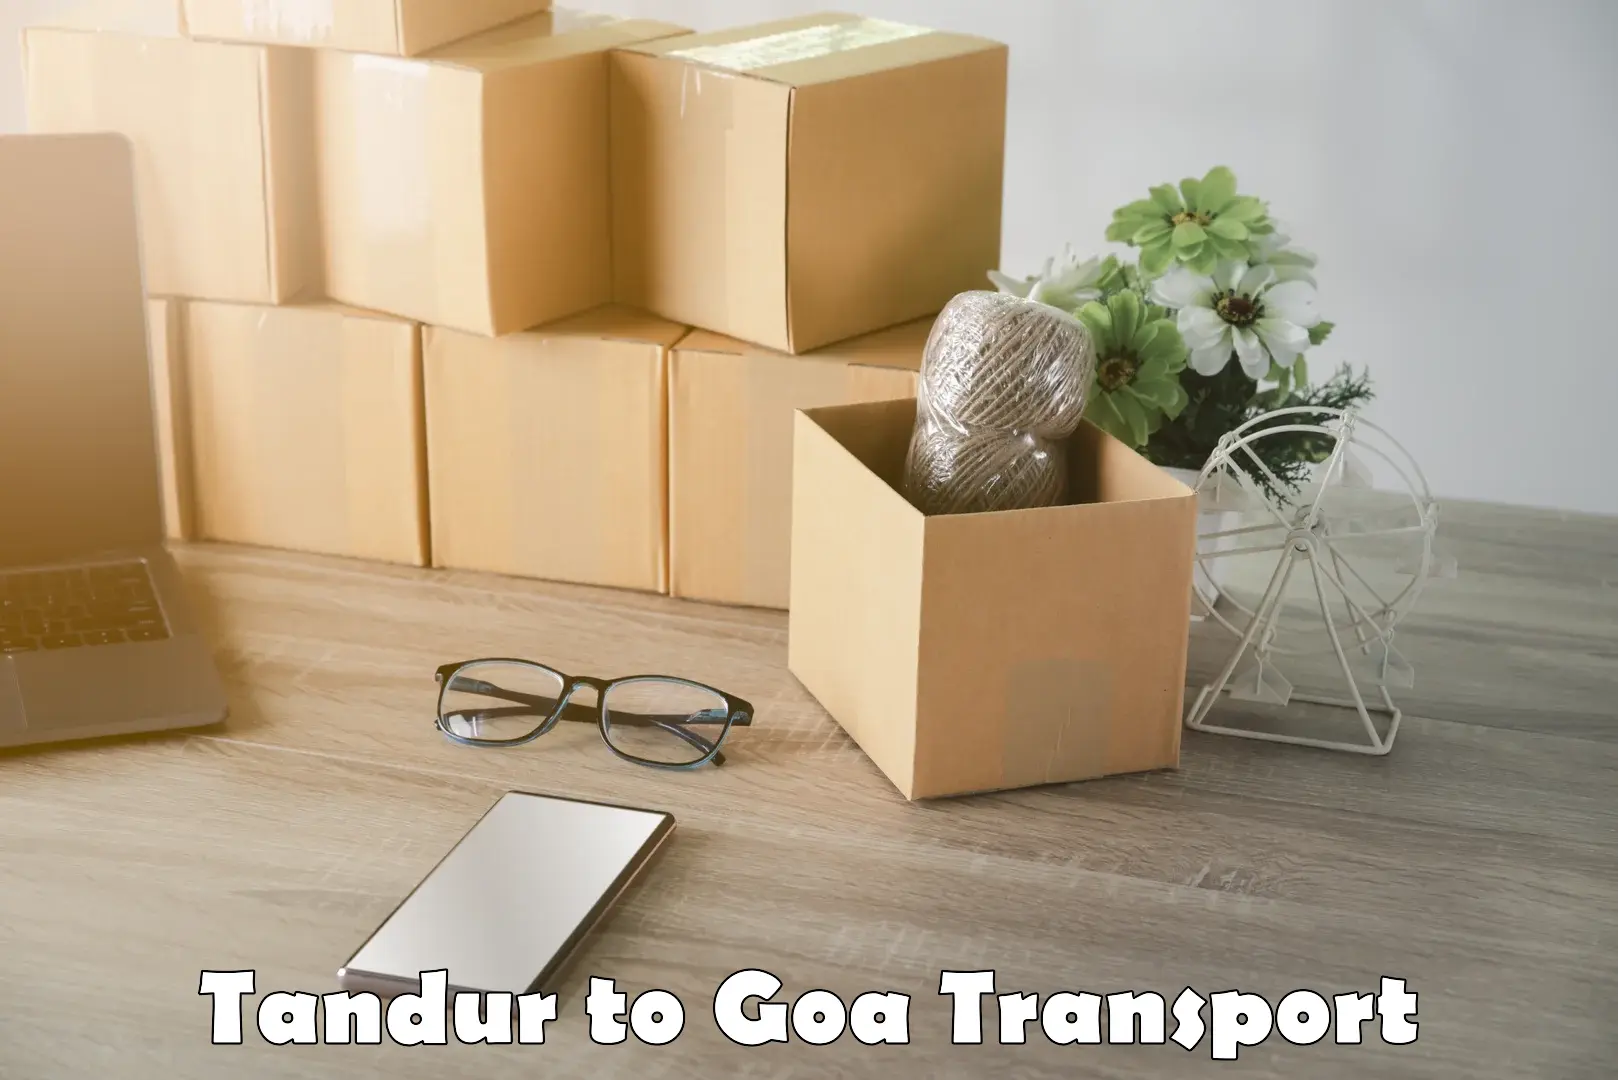 Interstate transport services Tandur to South Goa